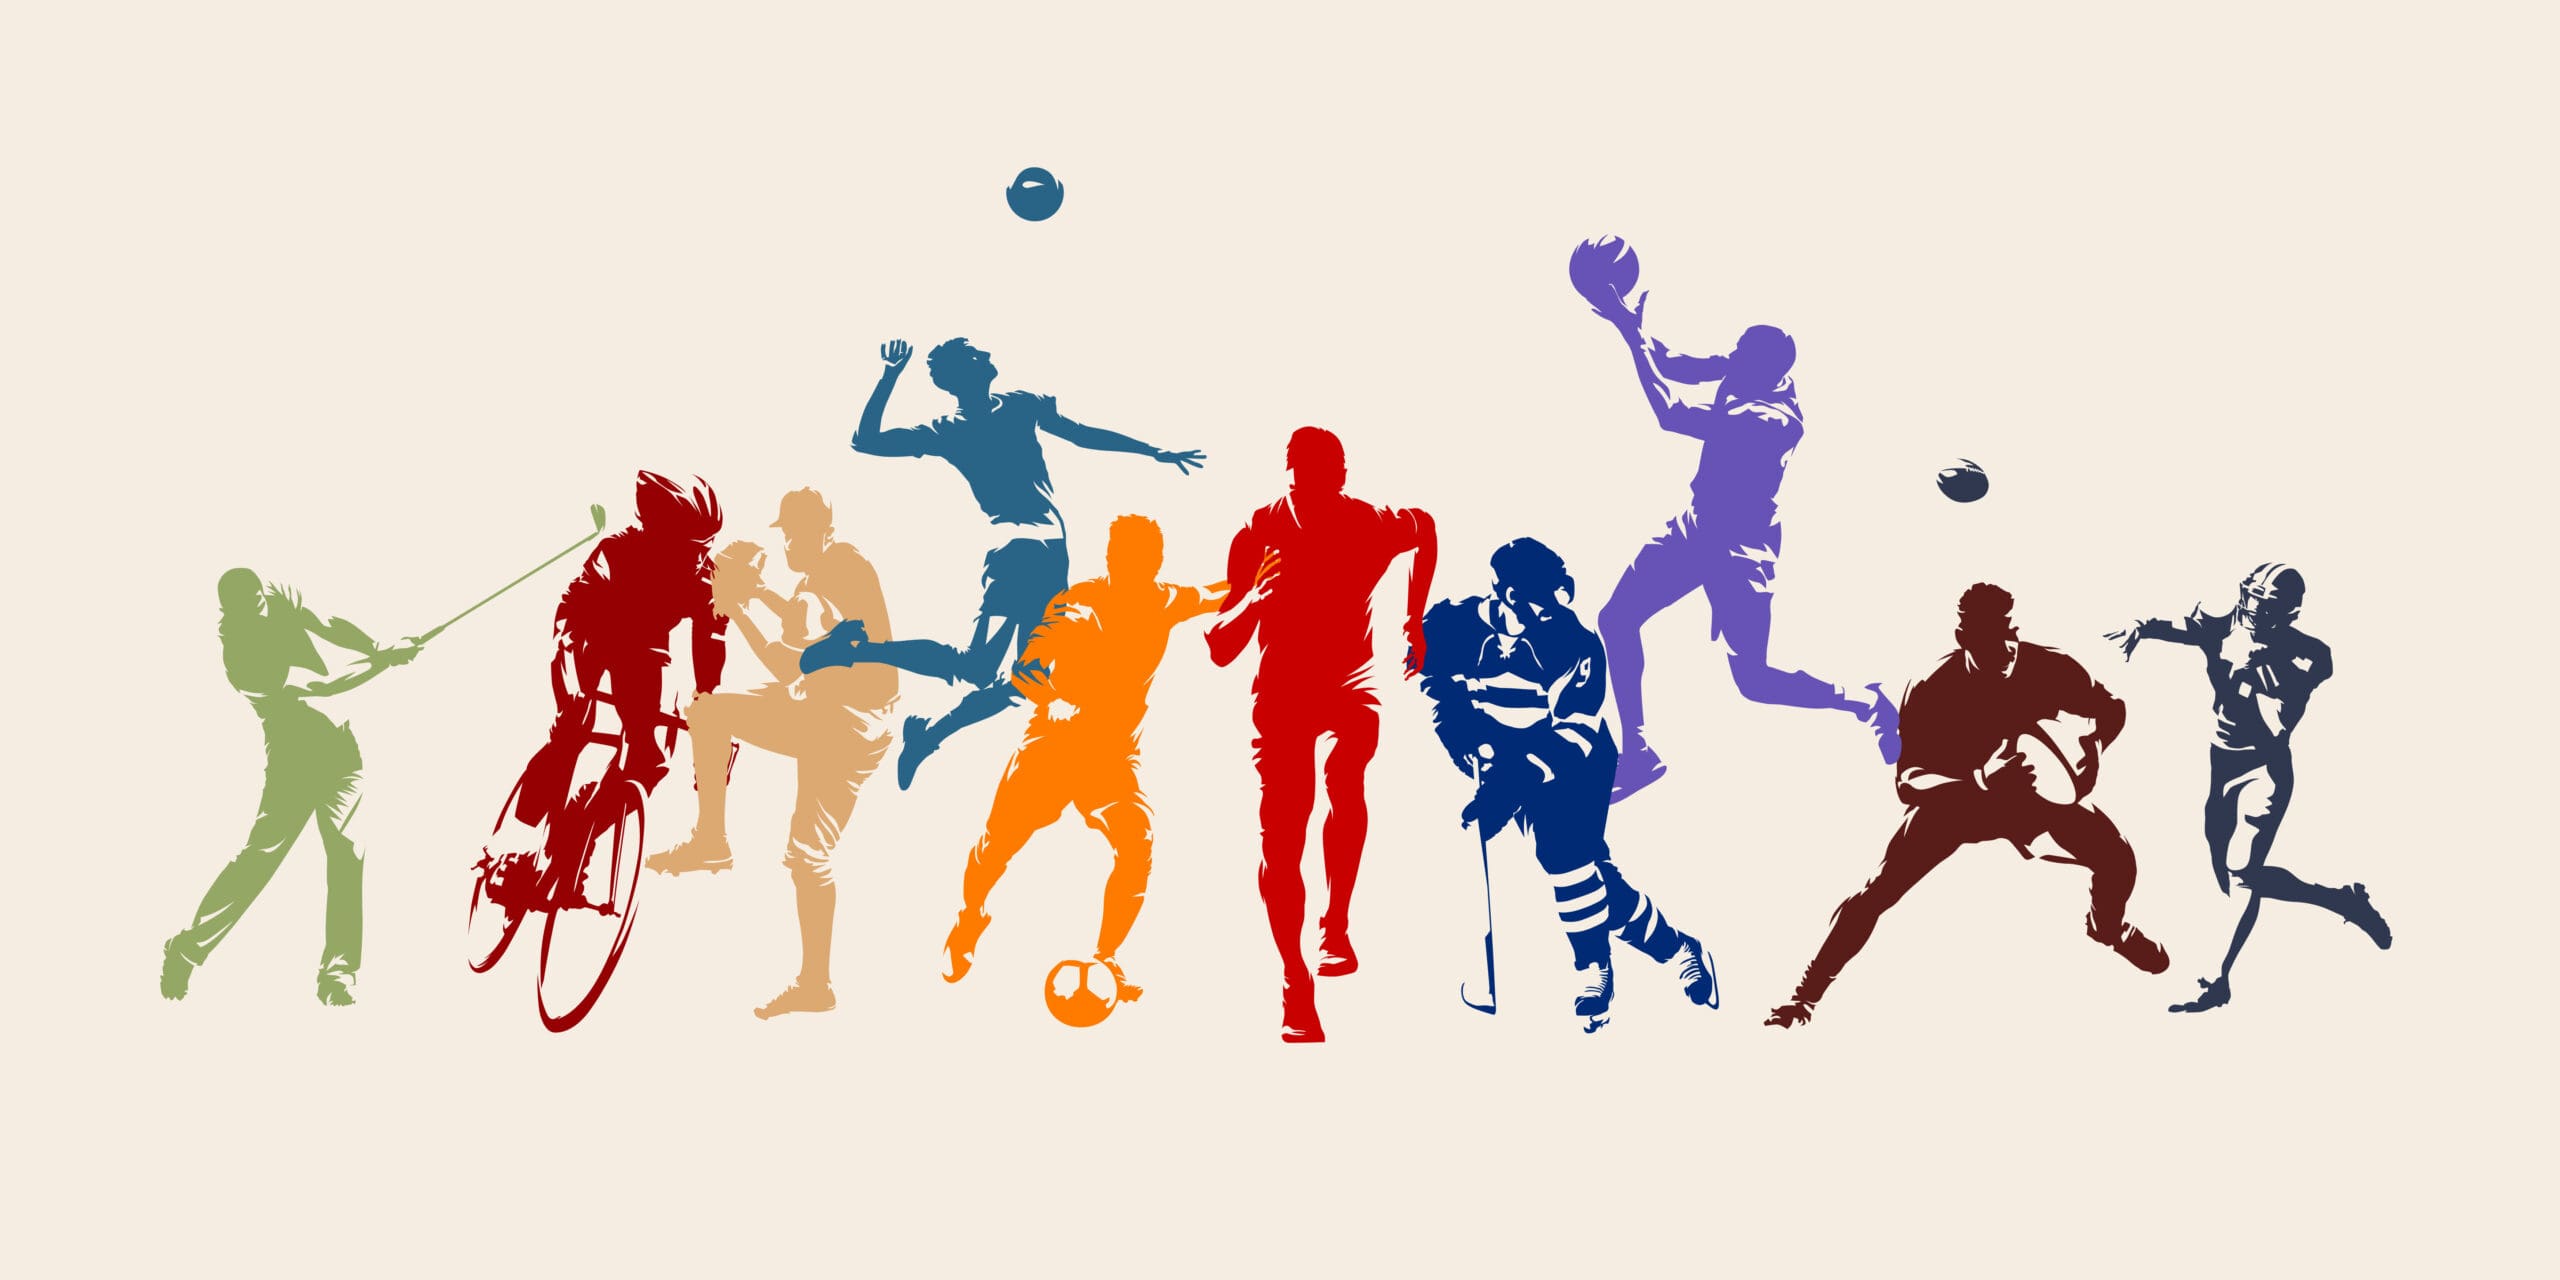 Silhouettes of people playing sports vector, including mouthguards | price 1 credit usd $1.